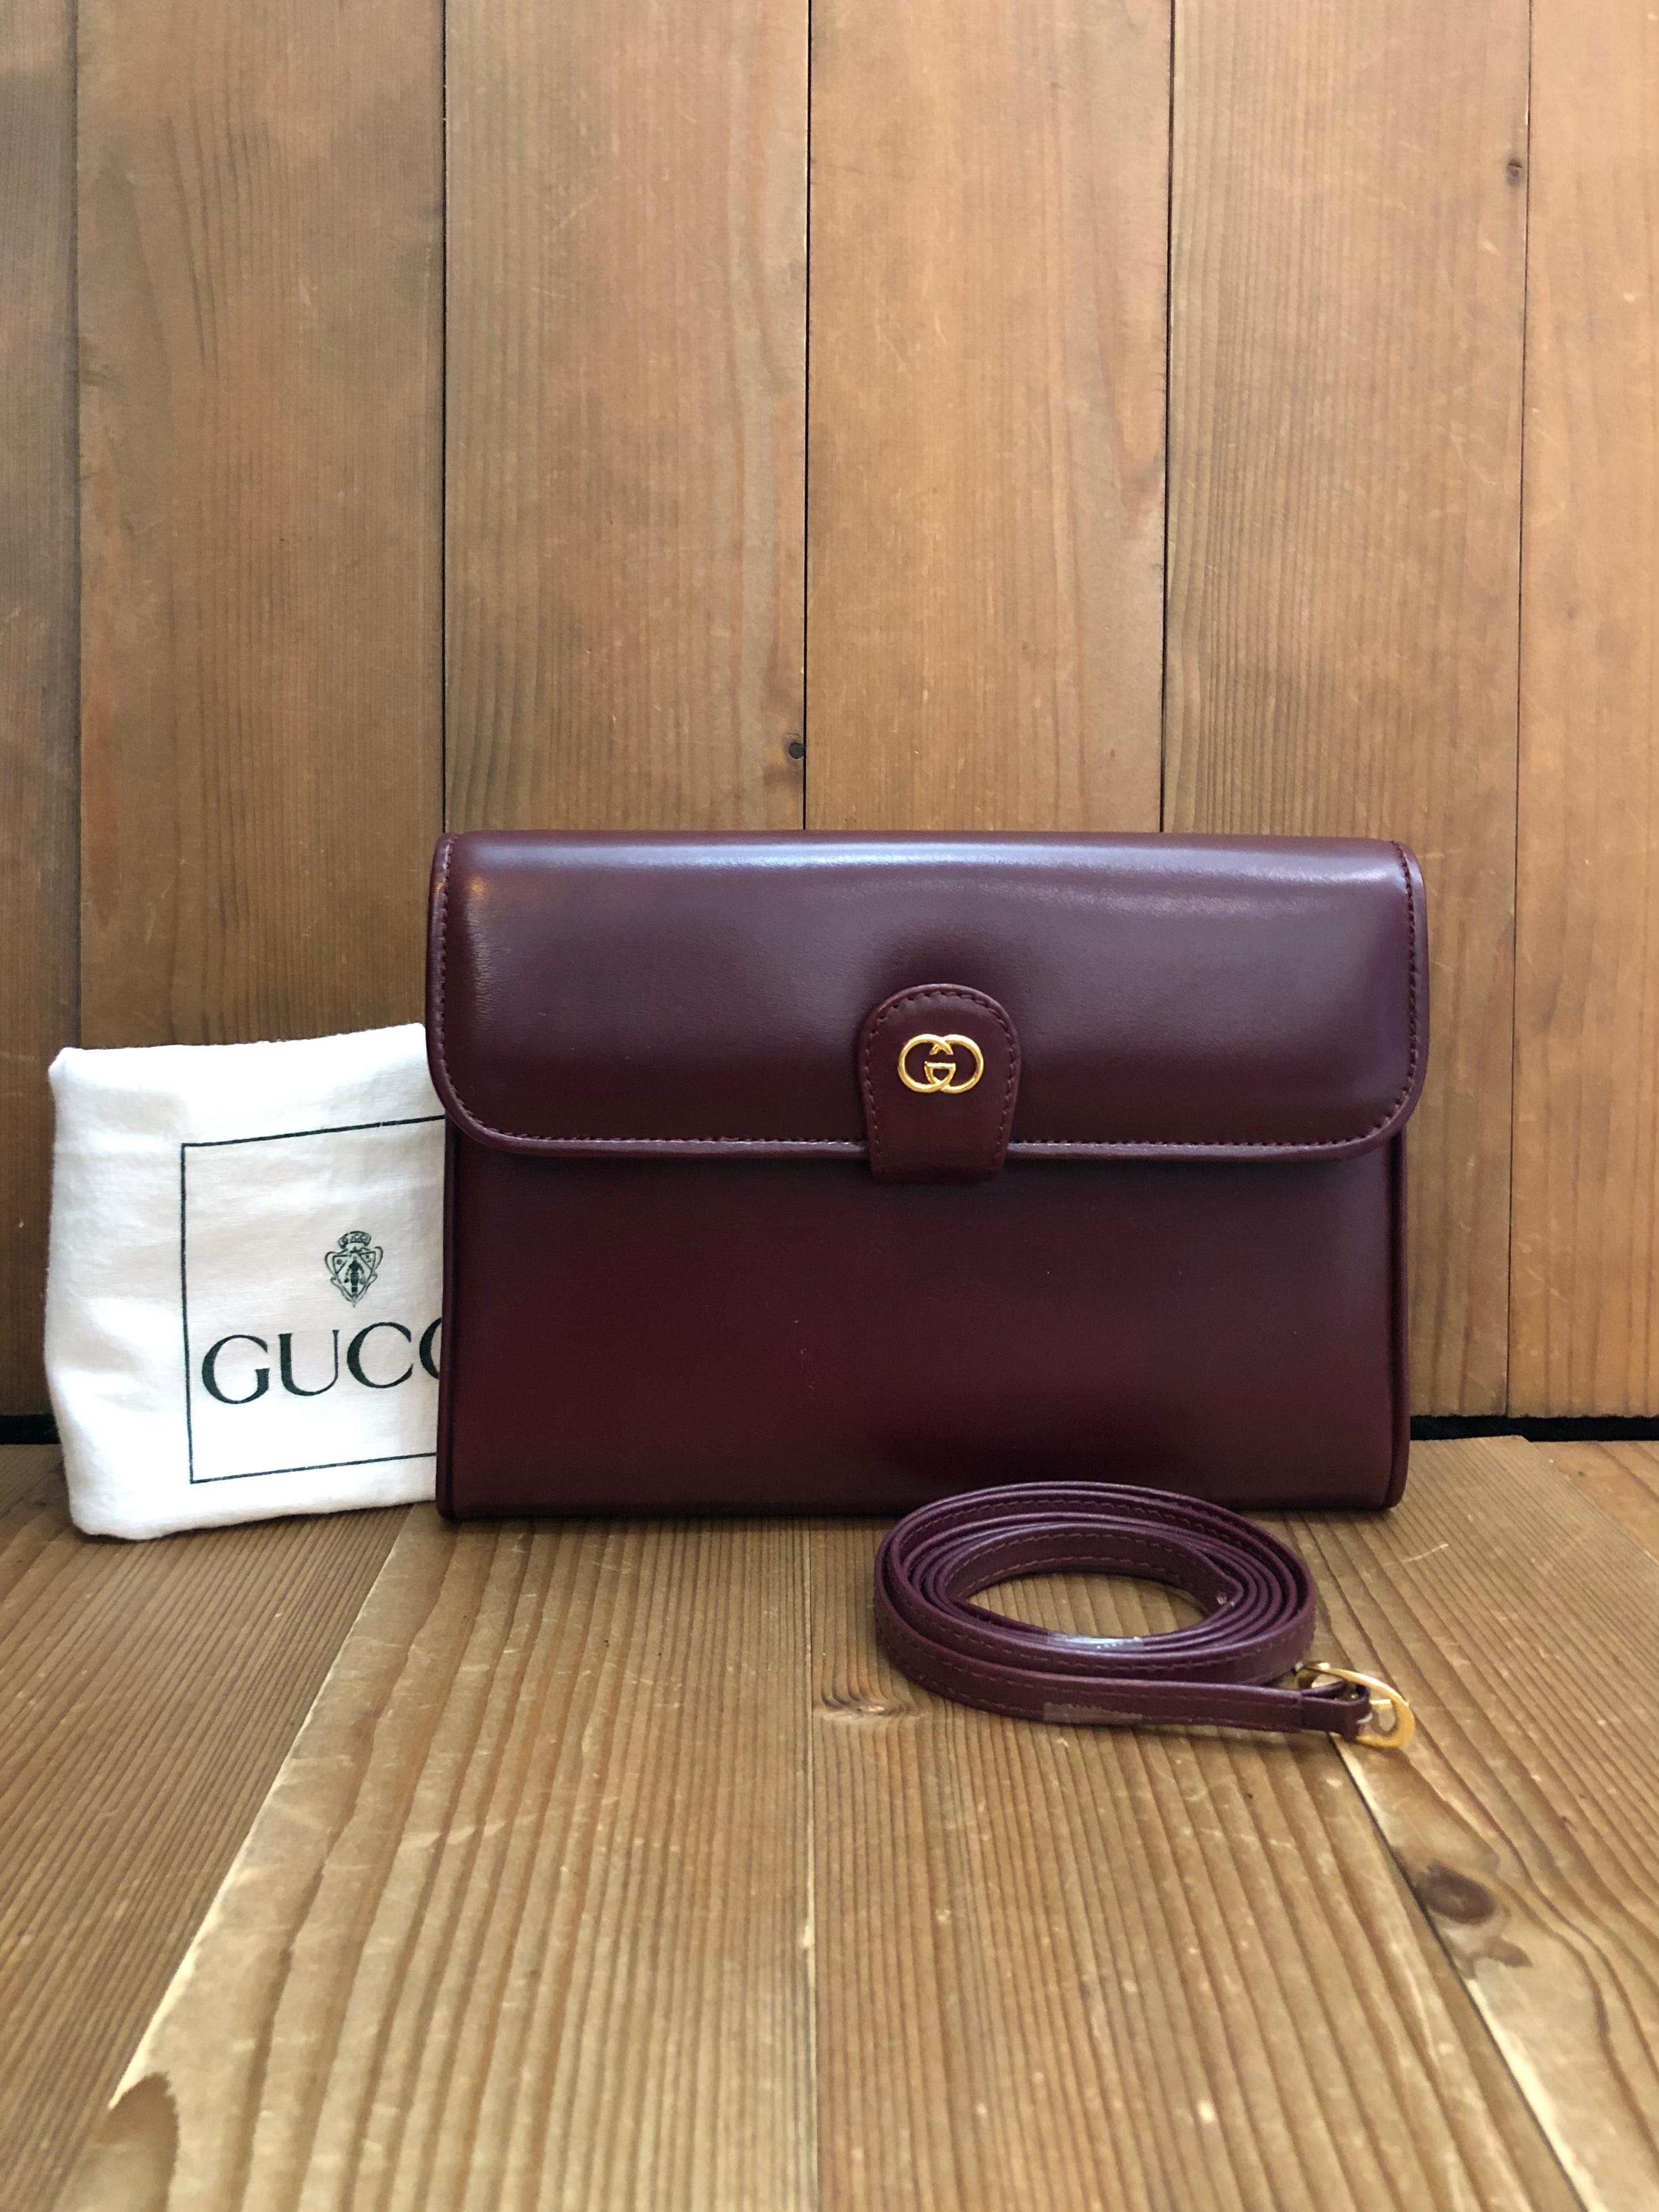 This vintage GUCCI two-way clutch crossbody bag is crafted of smooth calfskin leather in burgundy featuring gold toned hardware. Front flap GG snap closure opens to a luxurious nubuck leather interior featuring two main compartments and